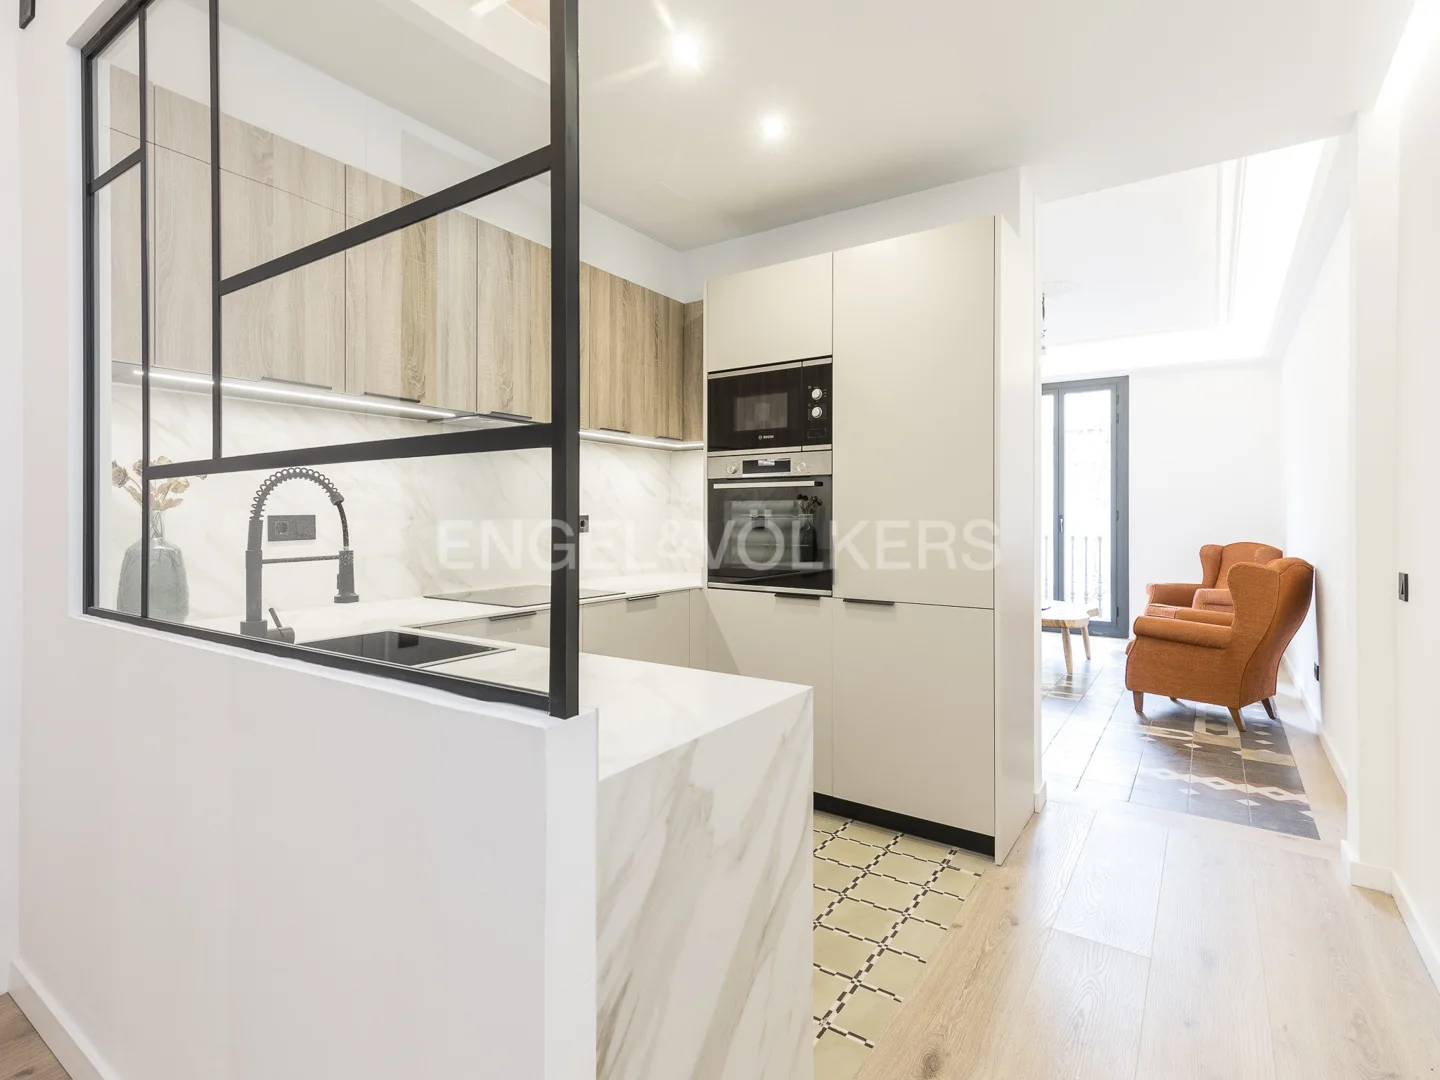 Brand new beautiful high-rise apartment in Eixample